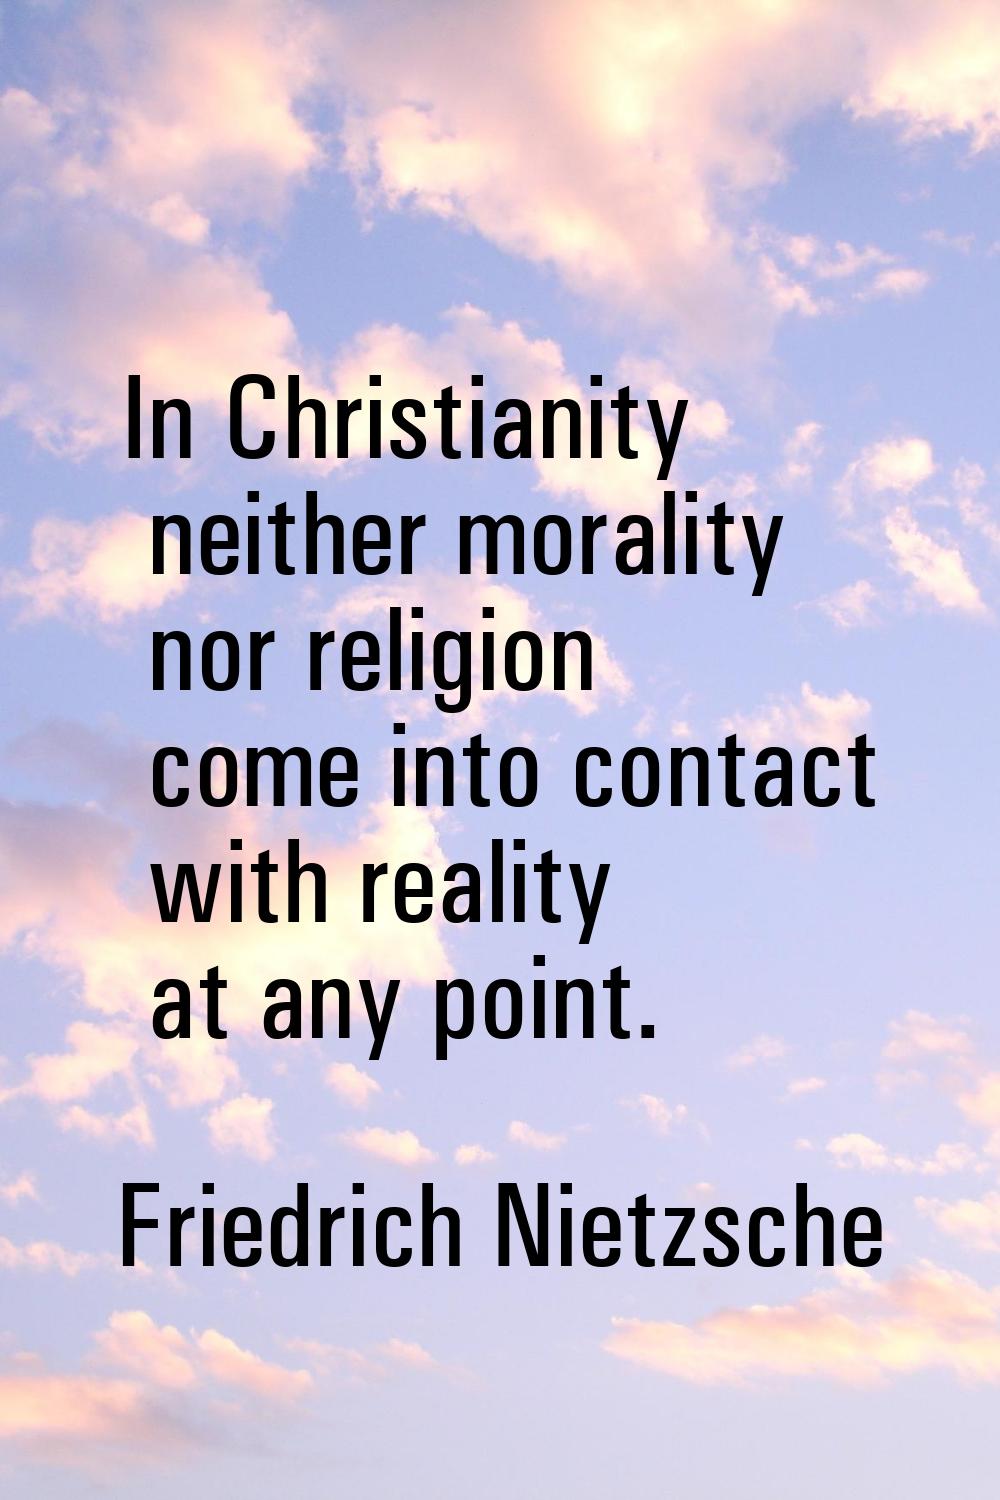 In Christianity neither morality nor religion come into contact with reality at any point.